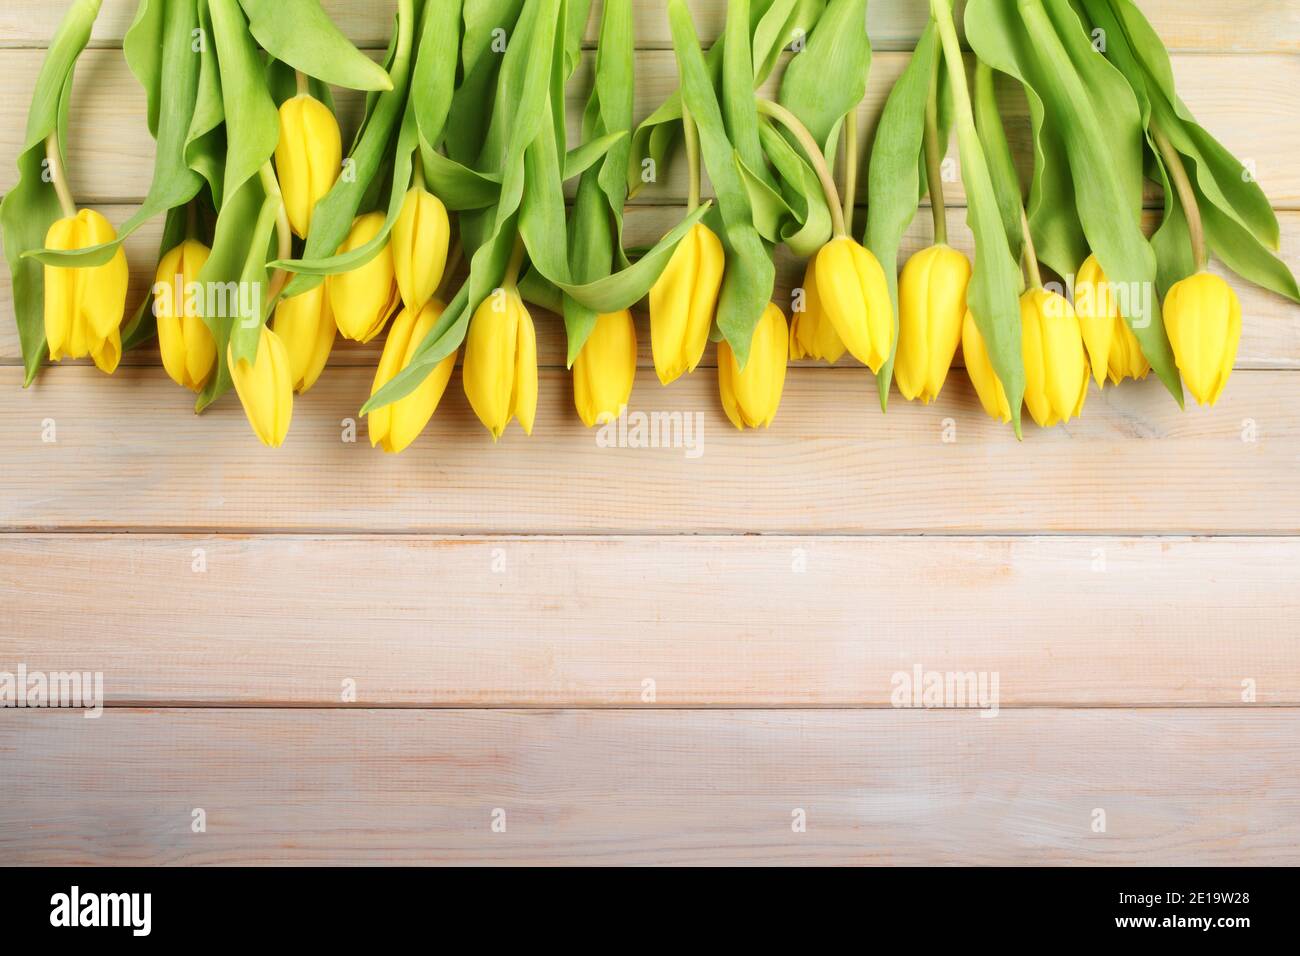 Easter background with yellow tulips on a wooden table Stock Photo